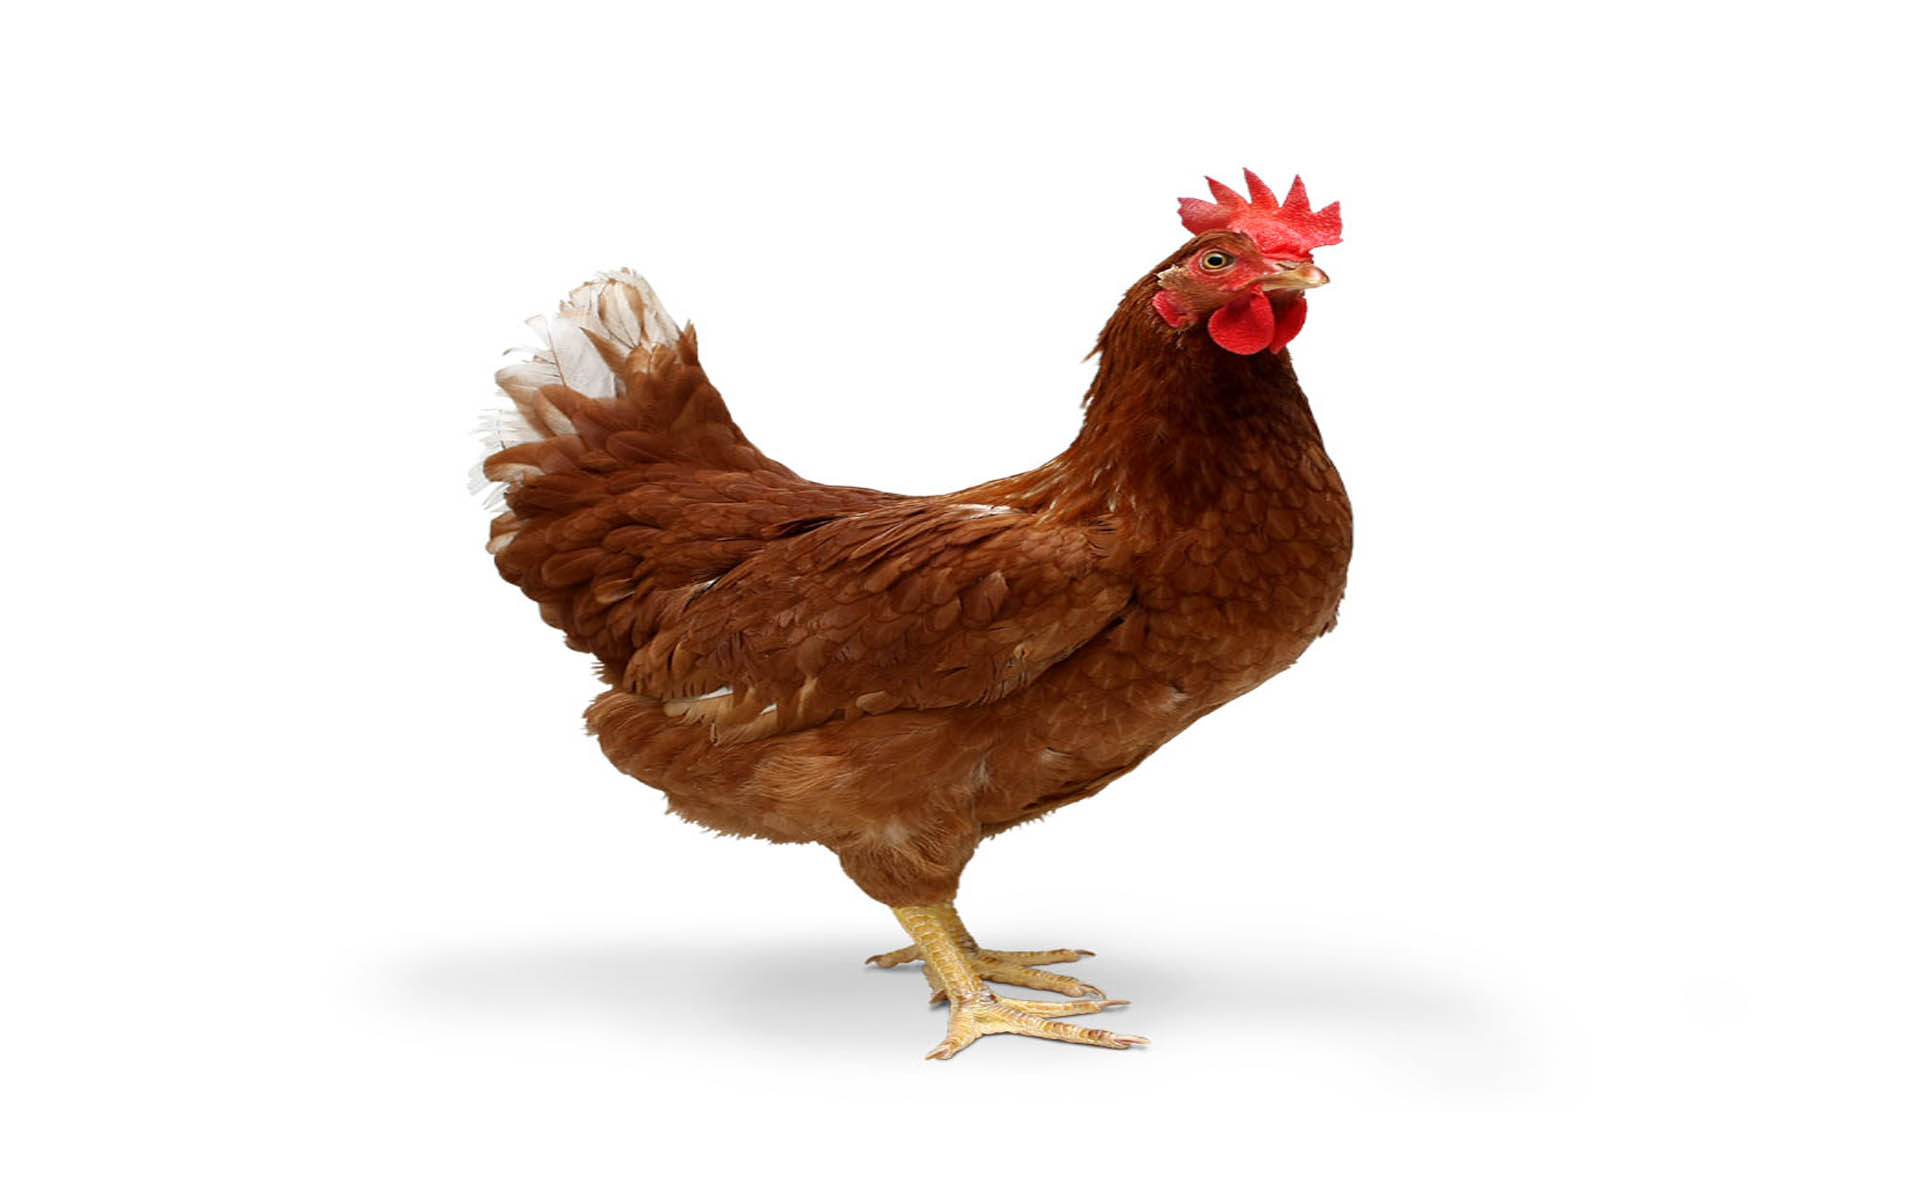 Wallpaper.wiki Chicken Backgrounds Pic Wpc001390   Chicken Hd Png - Cute Chicken, Transparent background PNG HD thumbnail